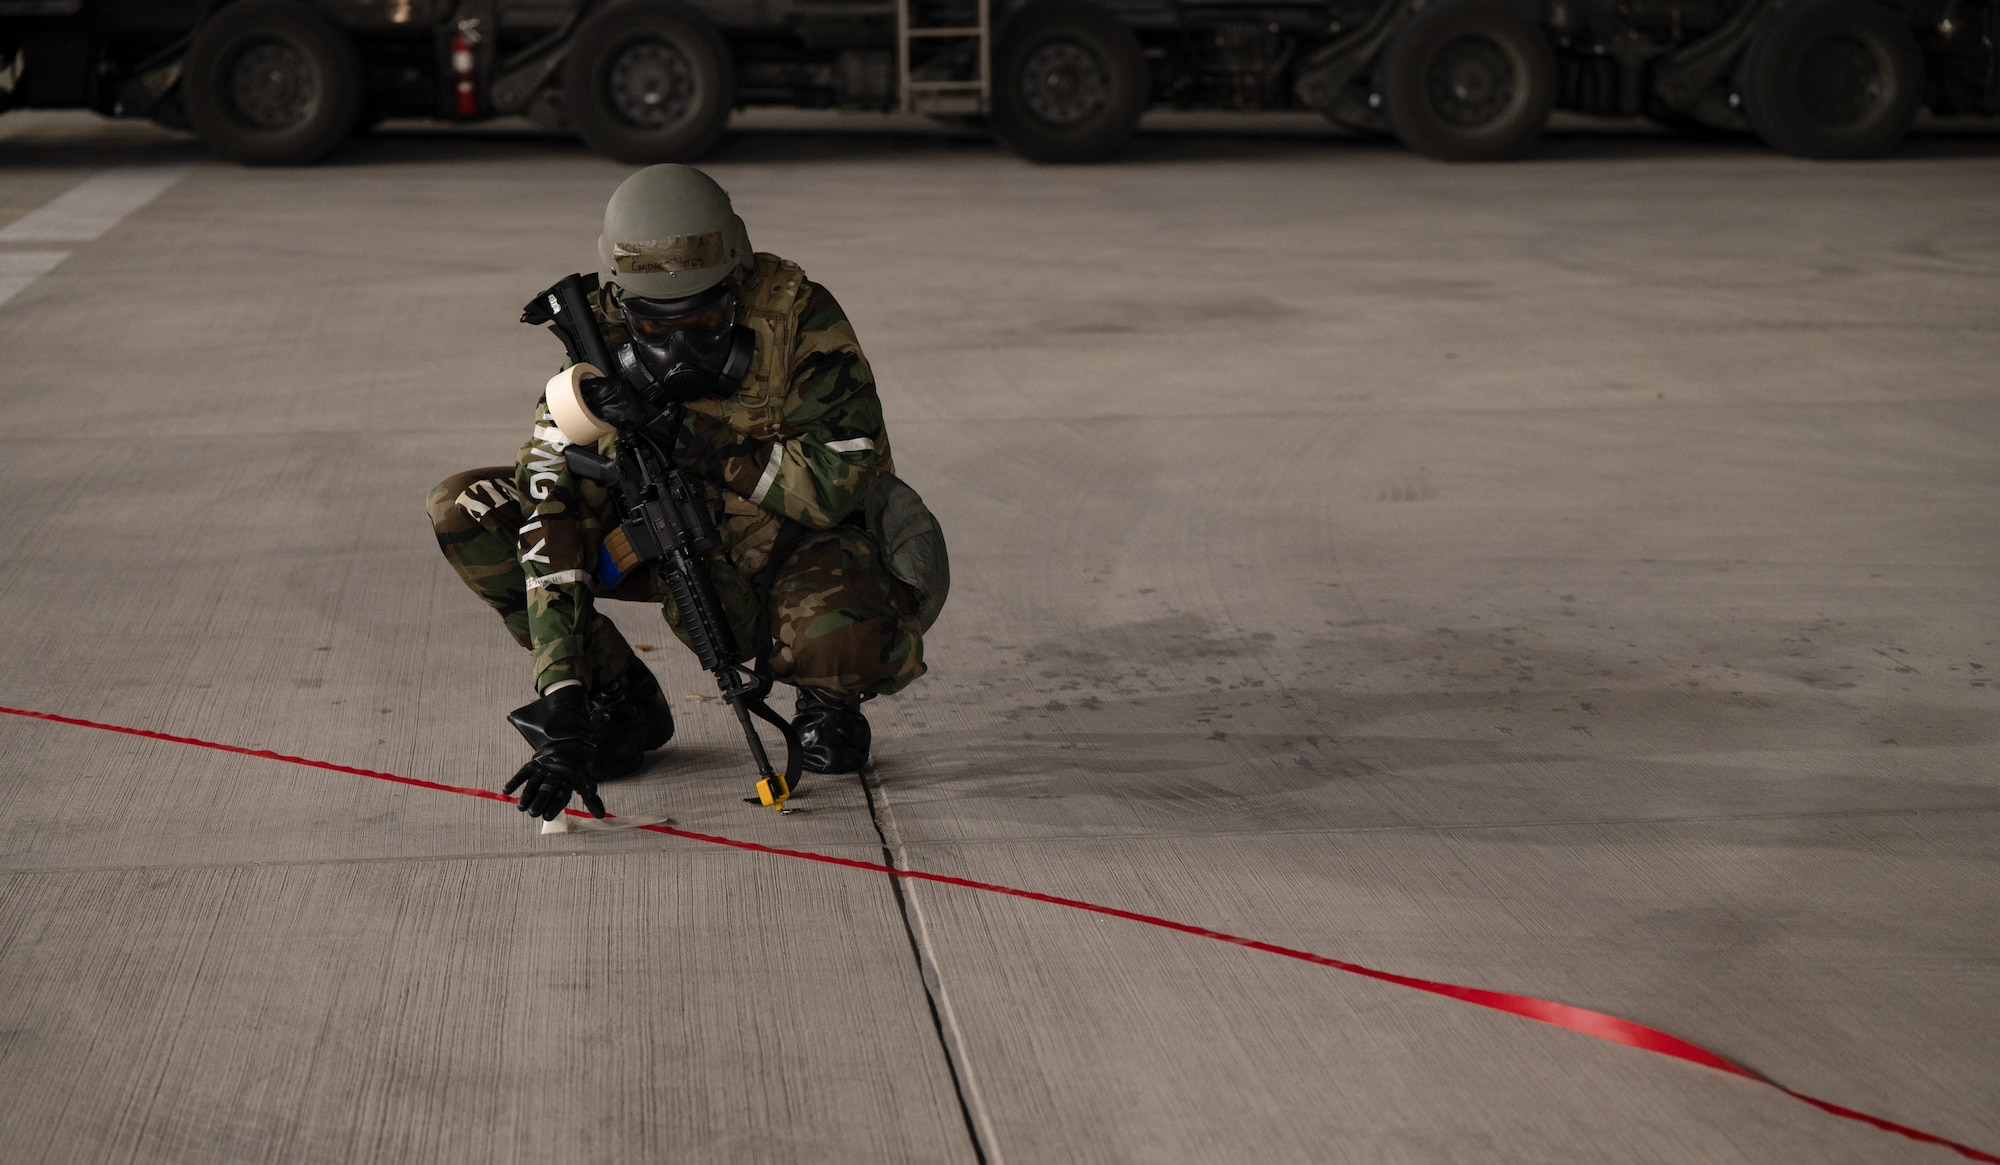 U.S. Air Force Airman 1st Class Candace Yates, 731st Air Mobility Squadron passenger service representative, cordons off a simulated unexploded ordnance during Beverly Midnight 24-1 at Osan Air Base, Republic of Korea, Jan. 30, 2024. As the most forward deployed permanently based wing in the Air Force, the 51st Fighter Wing is charged with providing mission-ready Airmen to execute combat operations and receive follow-on forces. BM24 is a routine training event that tests the military capabilities across the peninsula, allowing combined and joint training at both the operational and tactical levels. (U.S. Air Force photo by Senior Airman Brittany Russell)